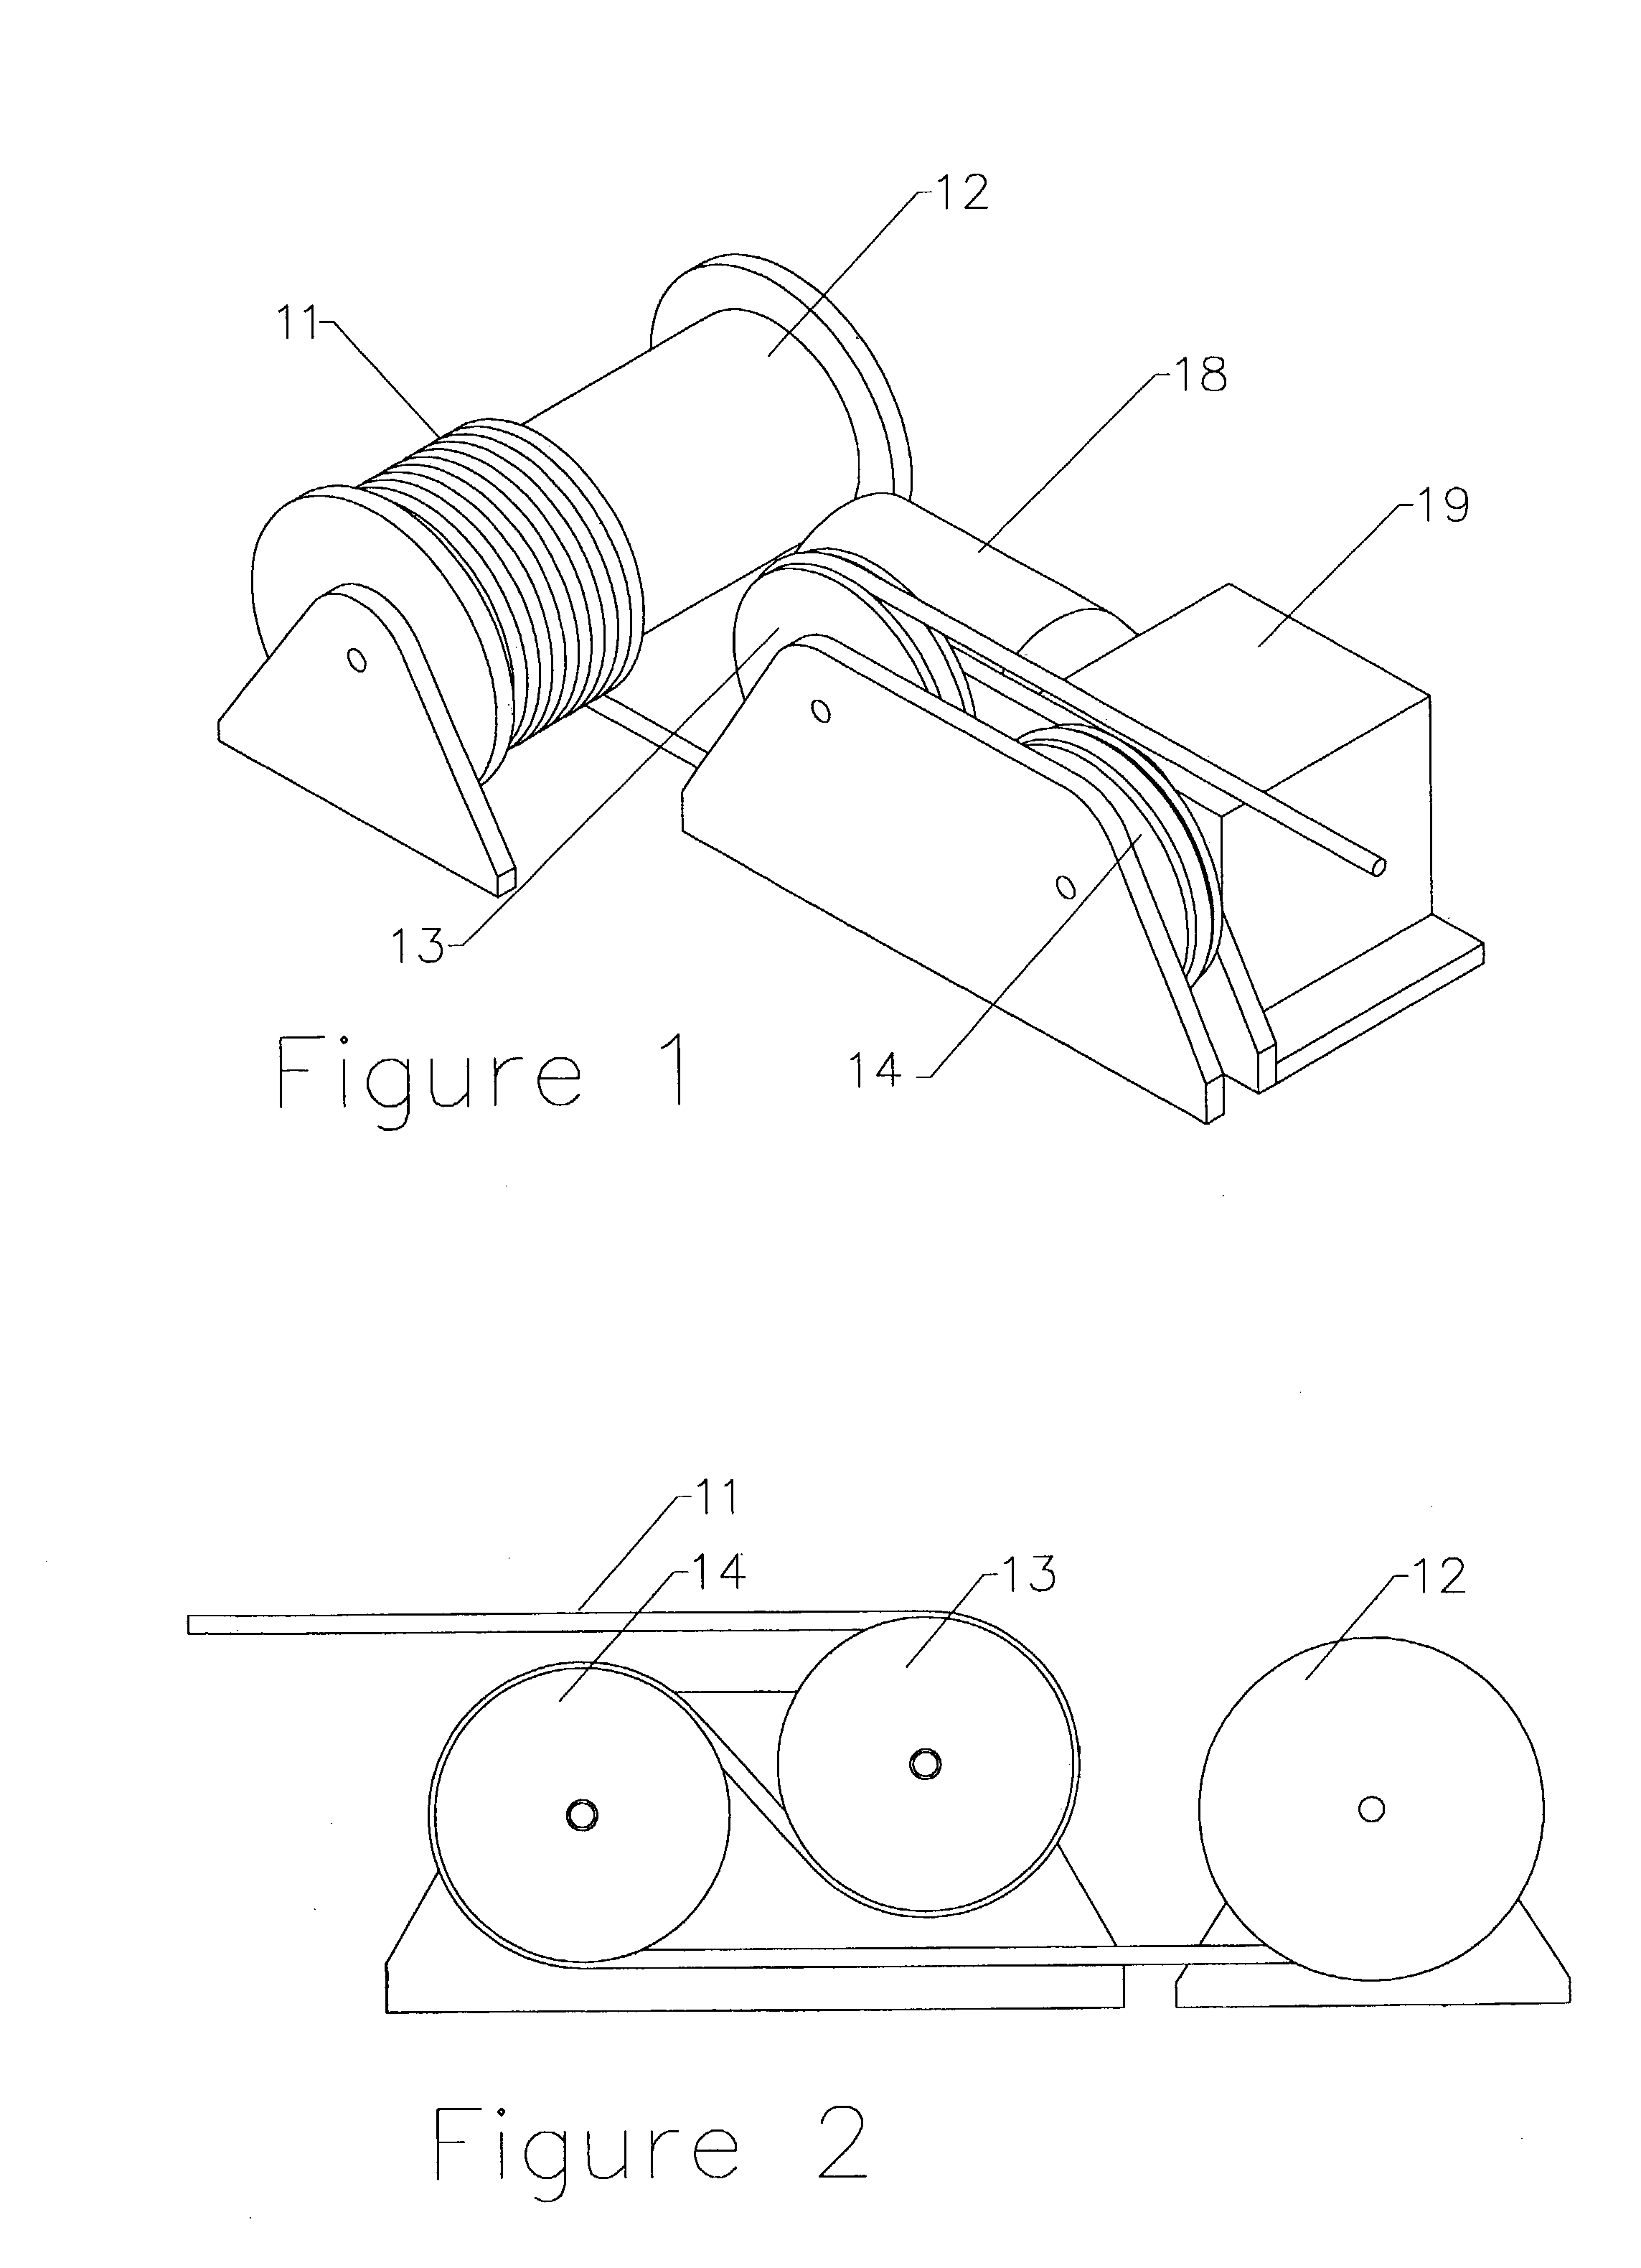 Winch assembly for use with synthetic ropes